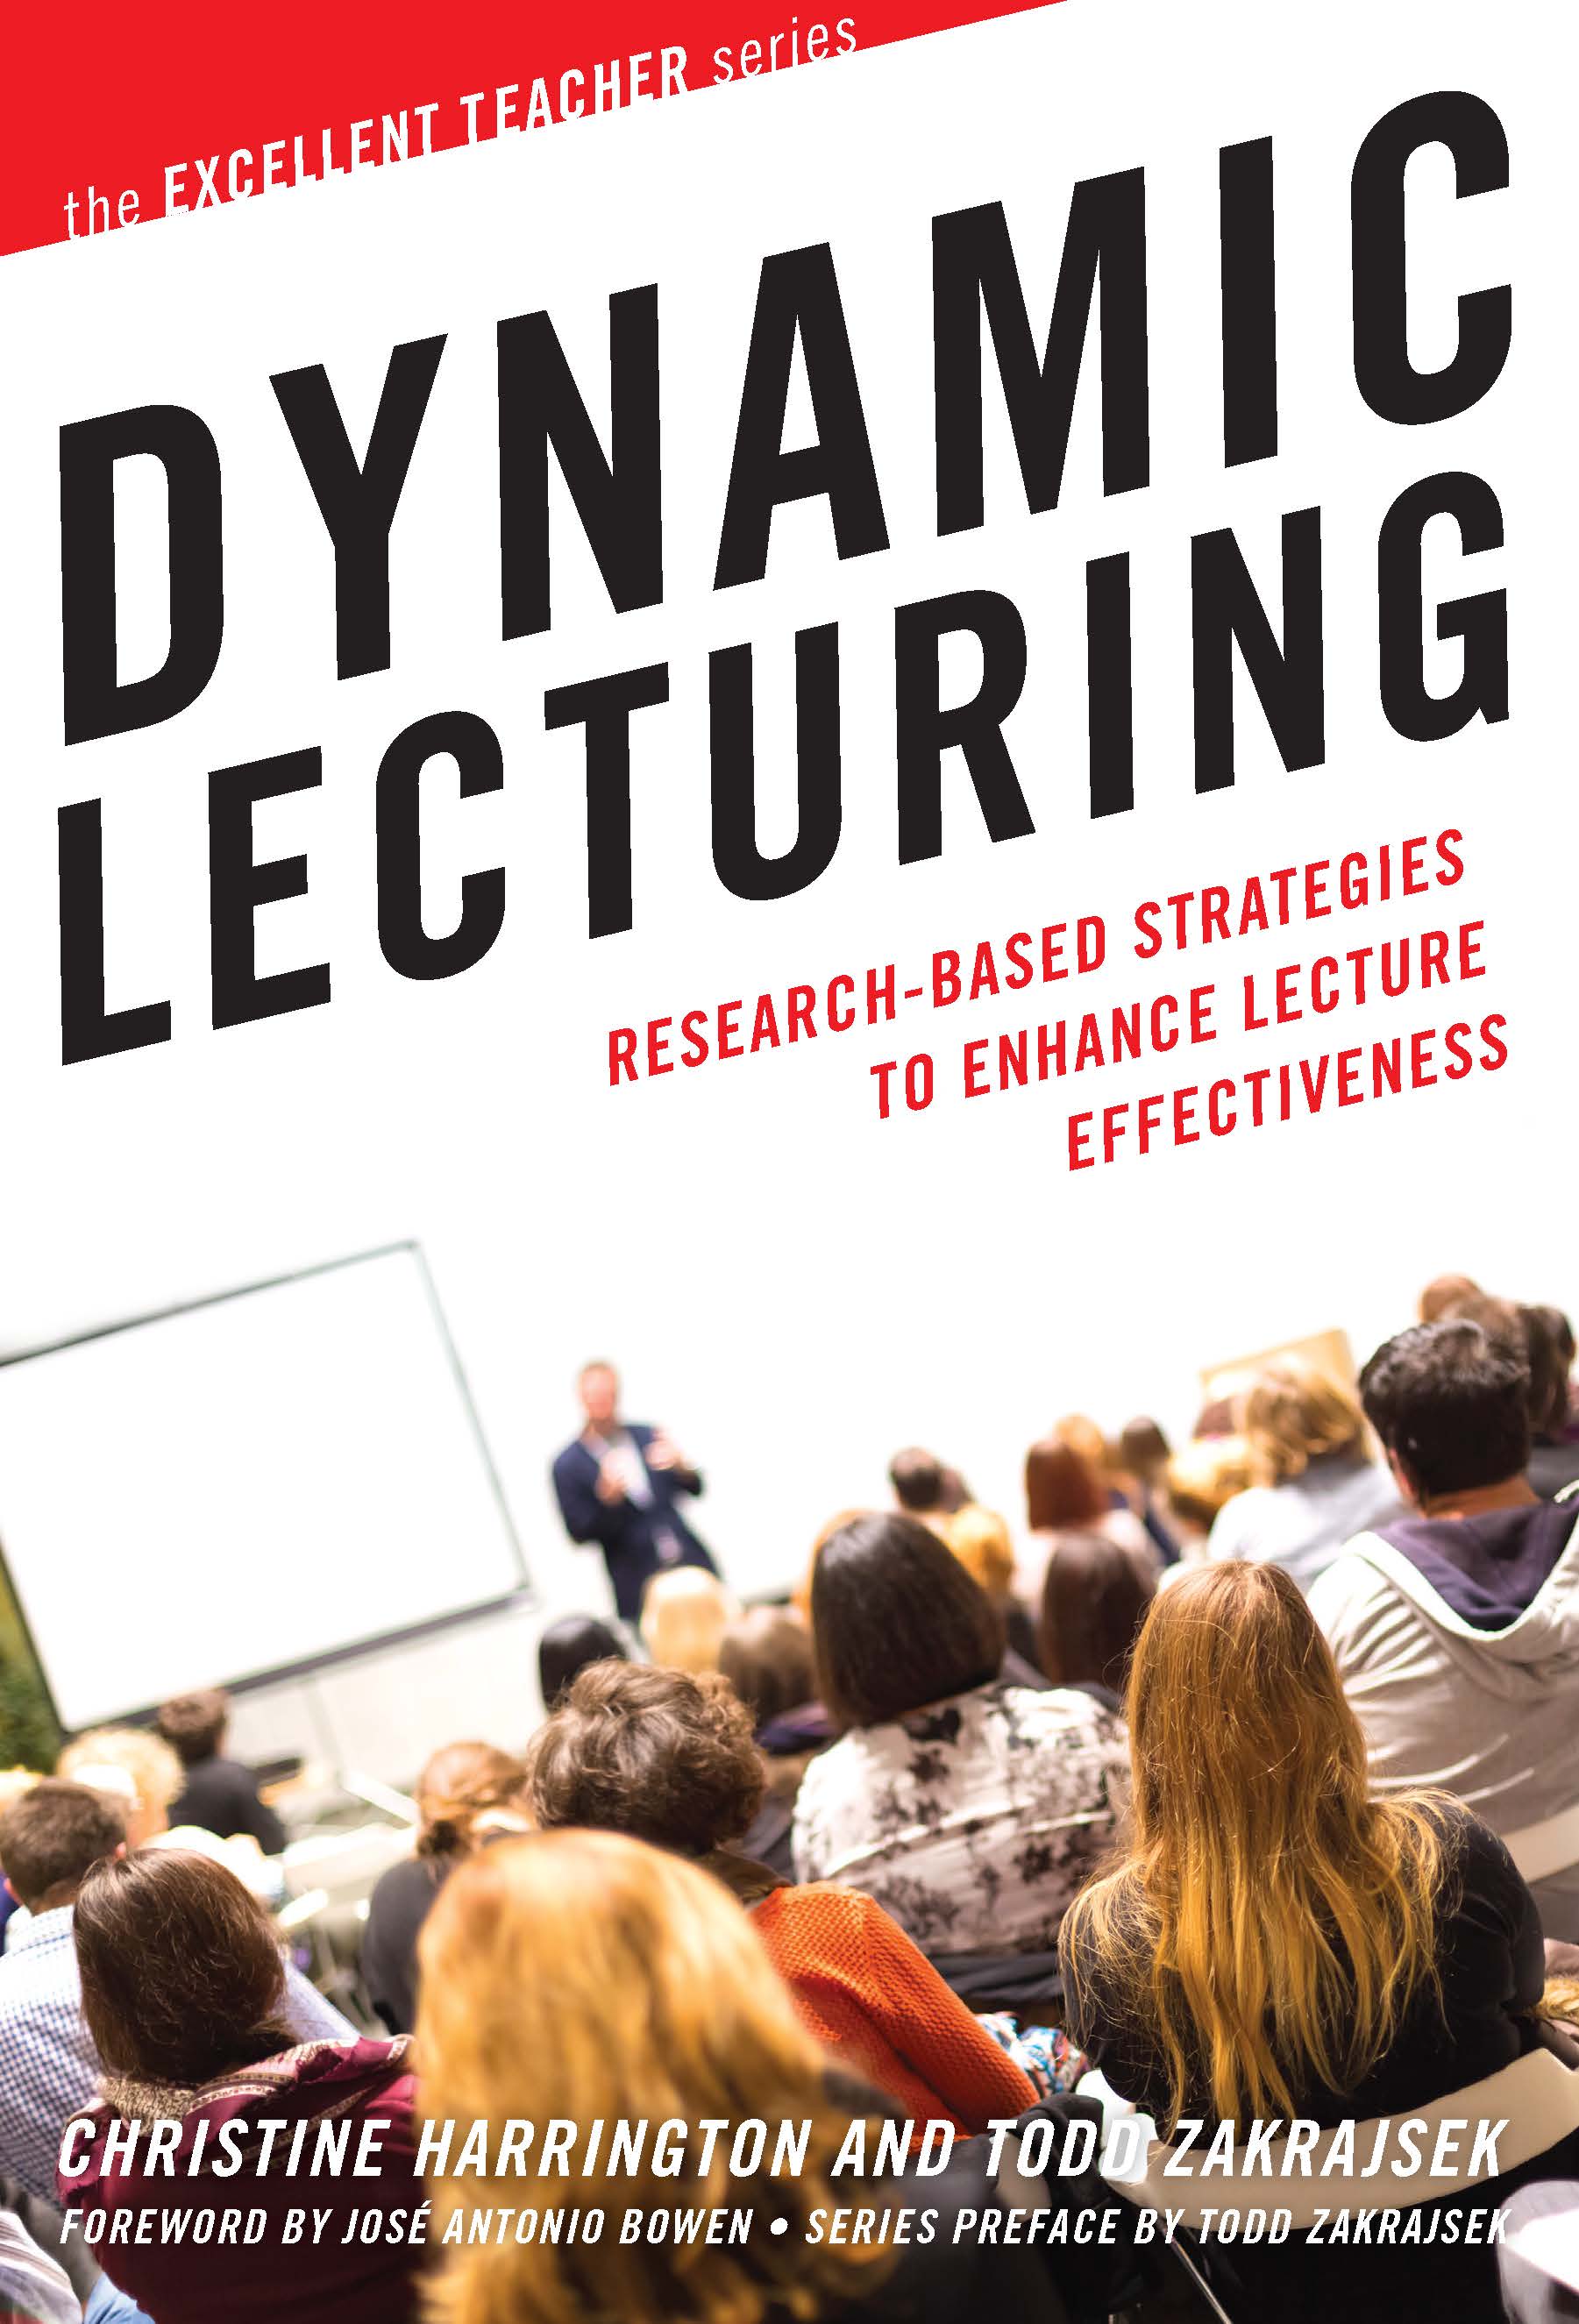 Dynamic Lecturing